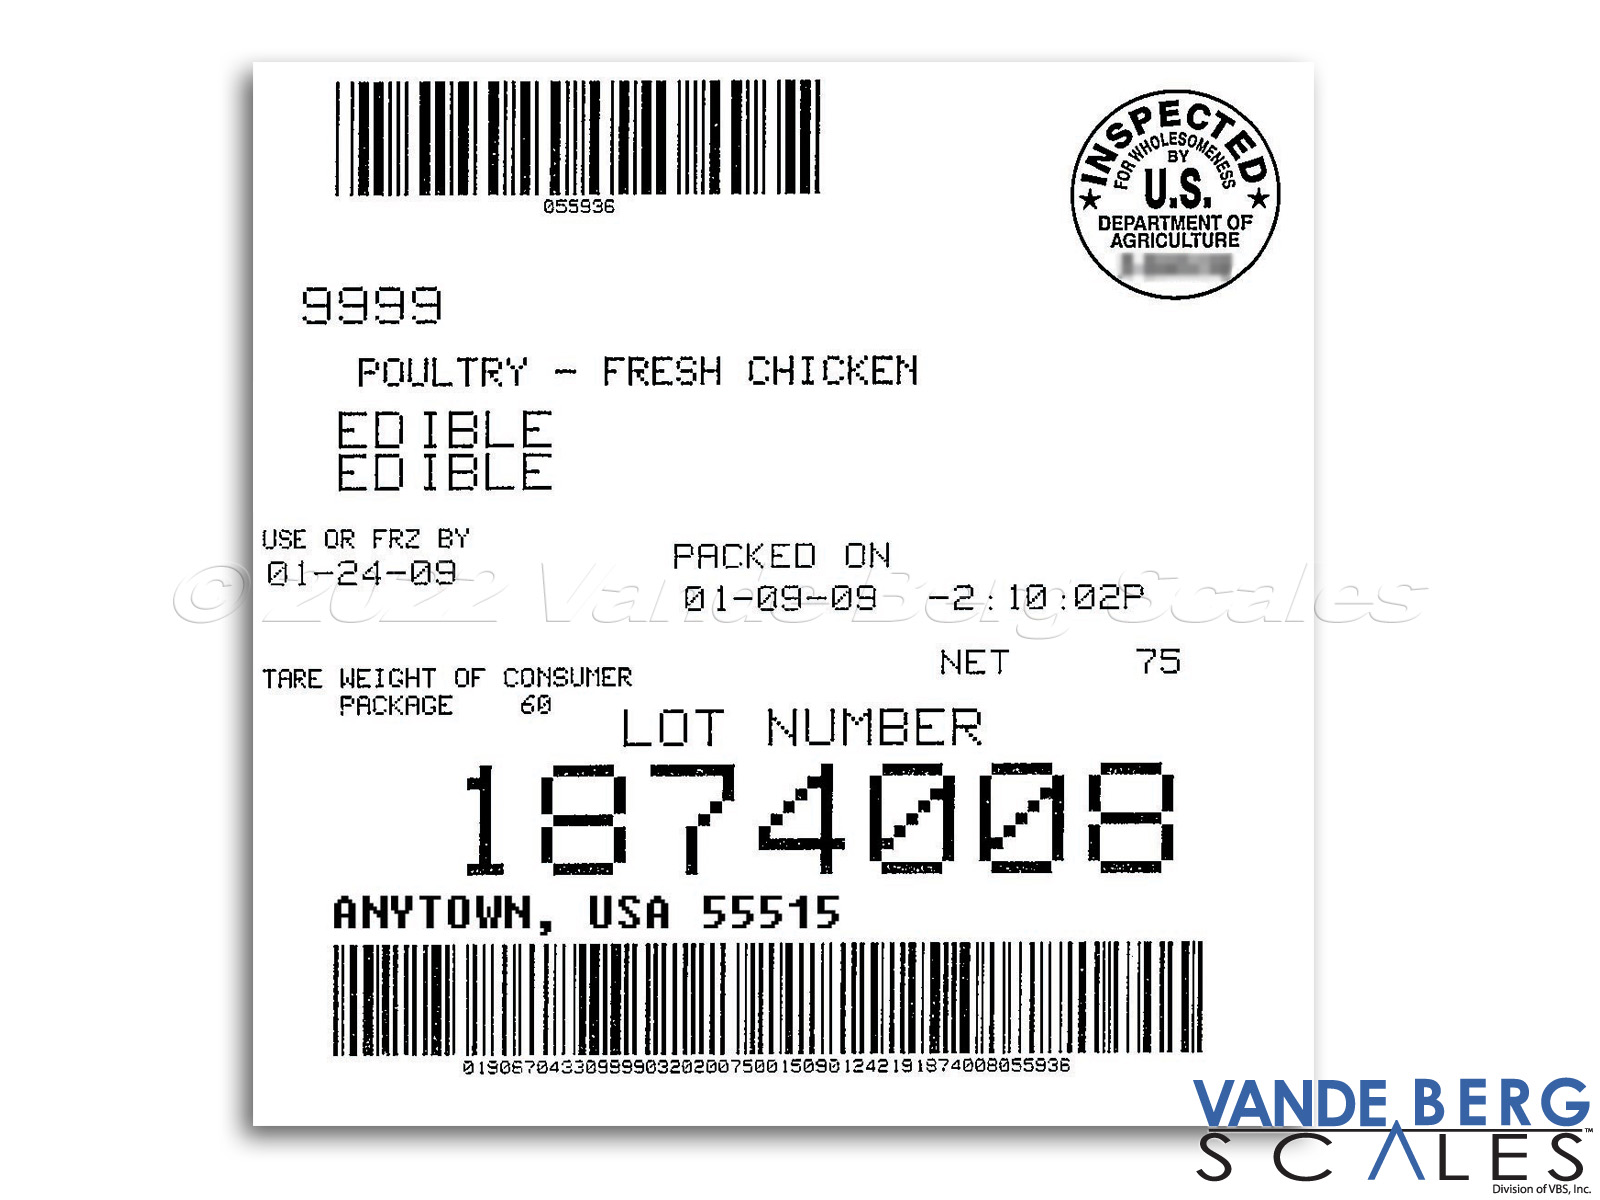 Barcodes and other valuable information can be easily printed with our systems